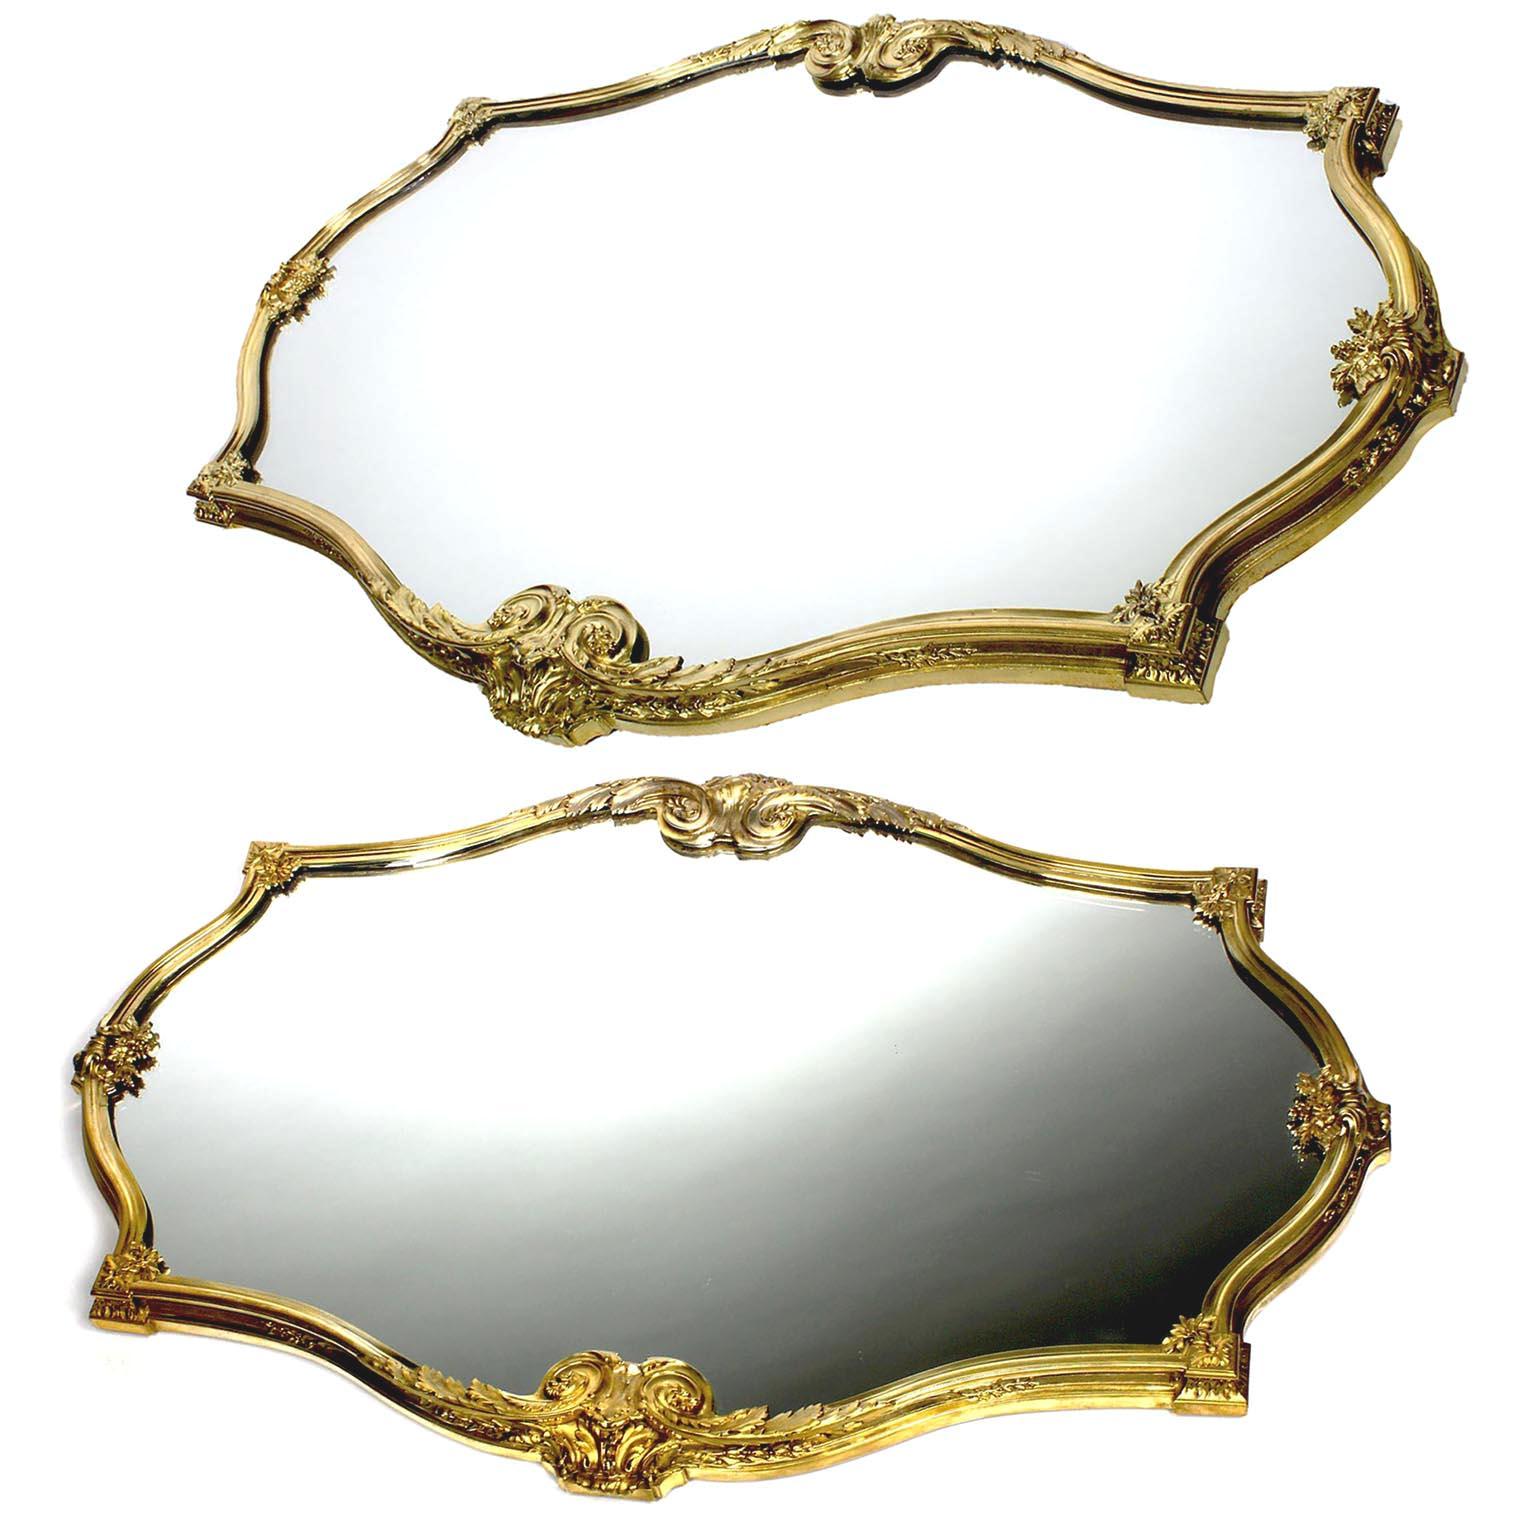 A fine pair of French 19th-20th century Louis XV style gilt-bronze surtout-de-Table plateau centerpieces by the Parsian Orfèvre Paul Canaux et Cie. The ovoid shaped gilt-bronze bodies with floral, acanthus and leaves design fitted with a mirror